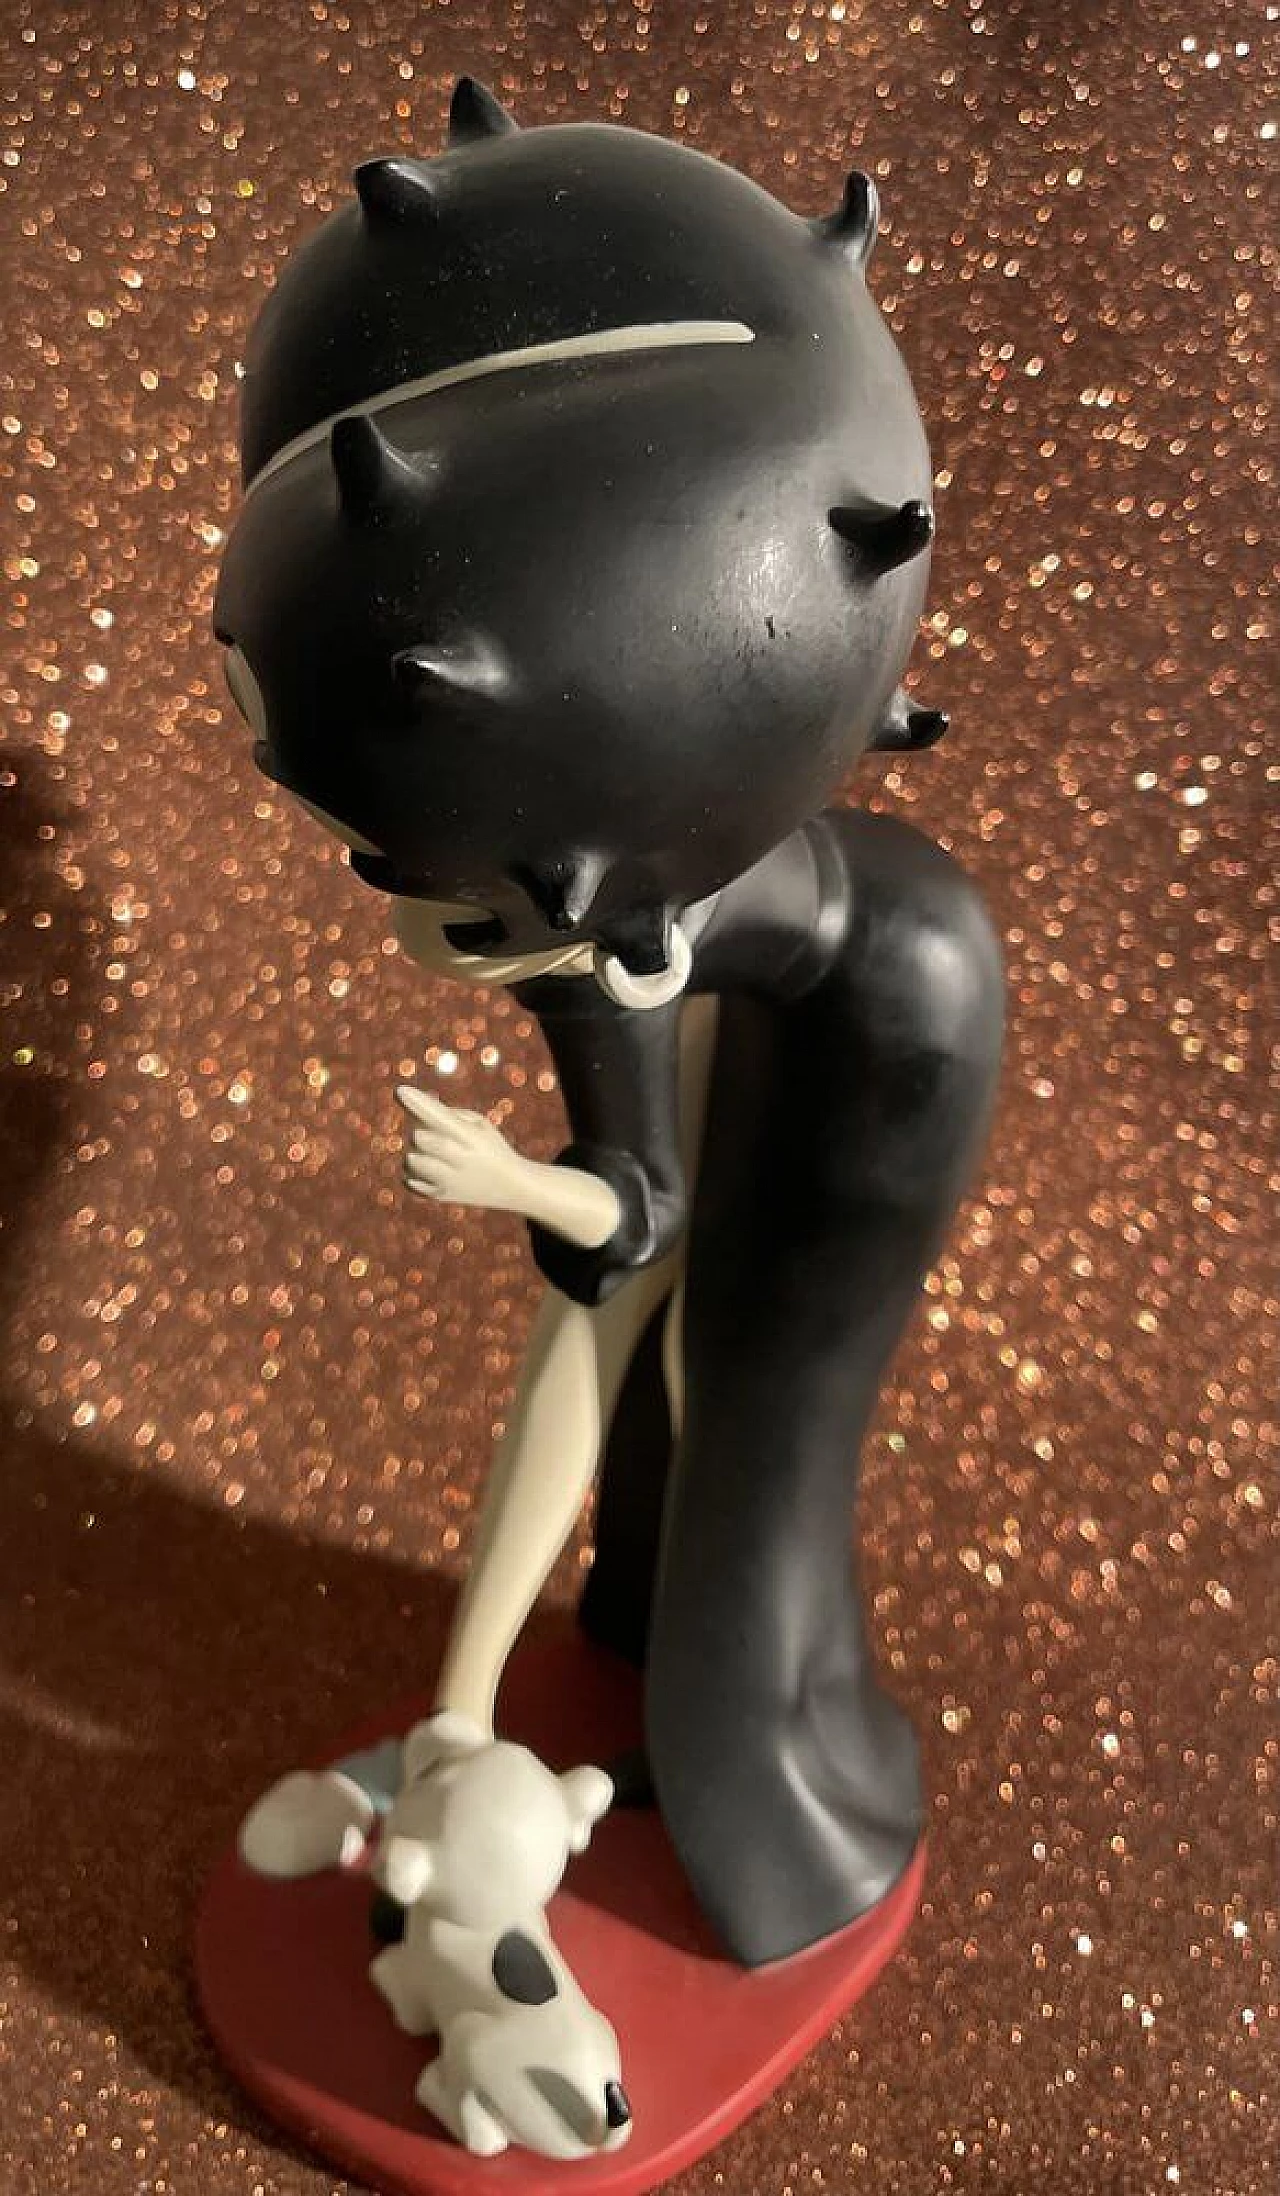 Betty Boop collectible figurine with black dress and small dog by Fleischer Studios, 2007 4